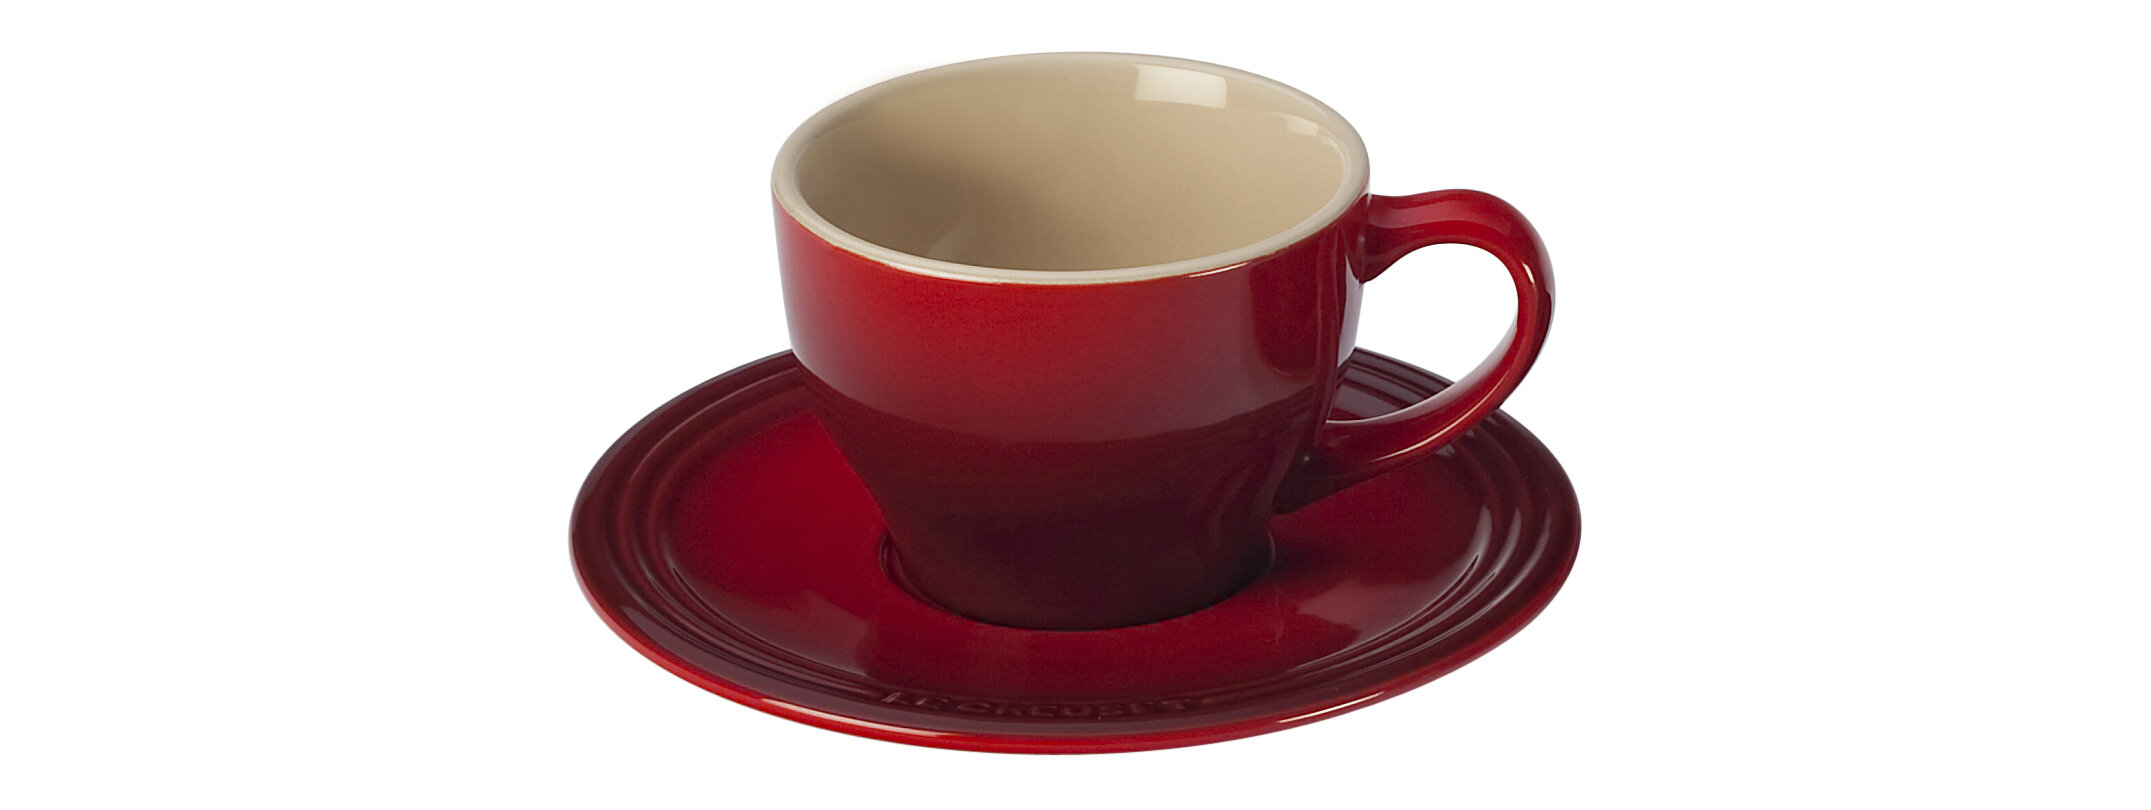 Le Creuset 2 Cappuccino/Espresso Cups & Saucers Ombre Red - Coffee